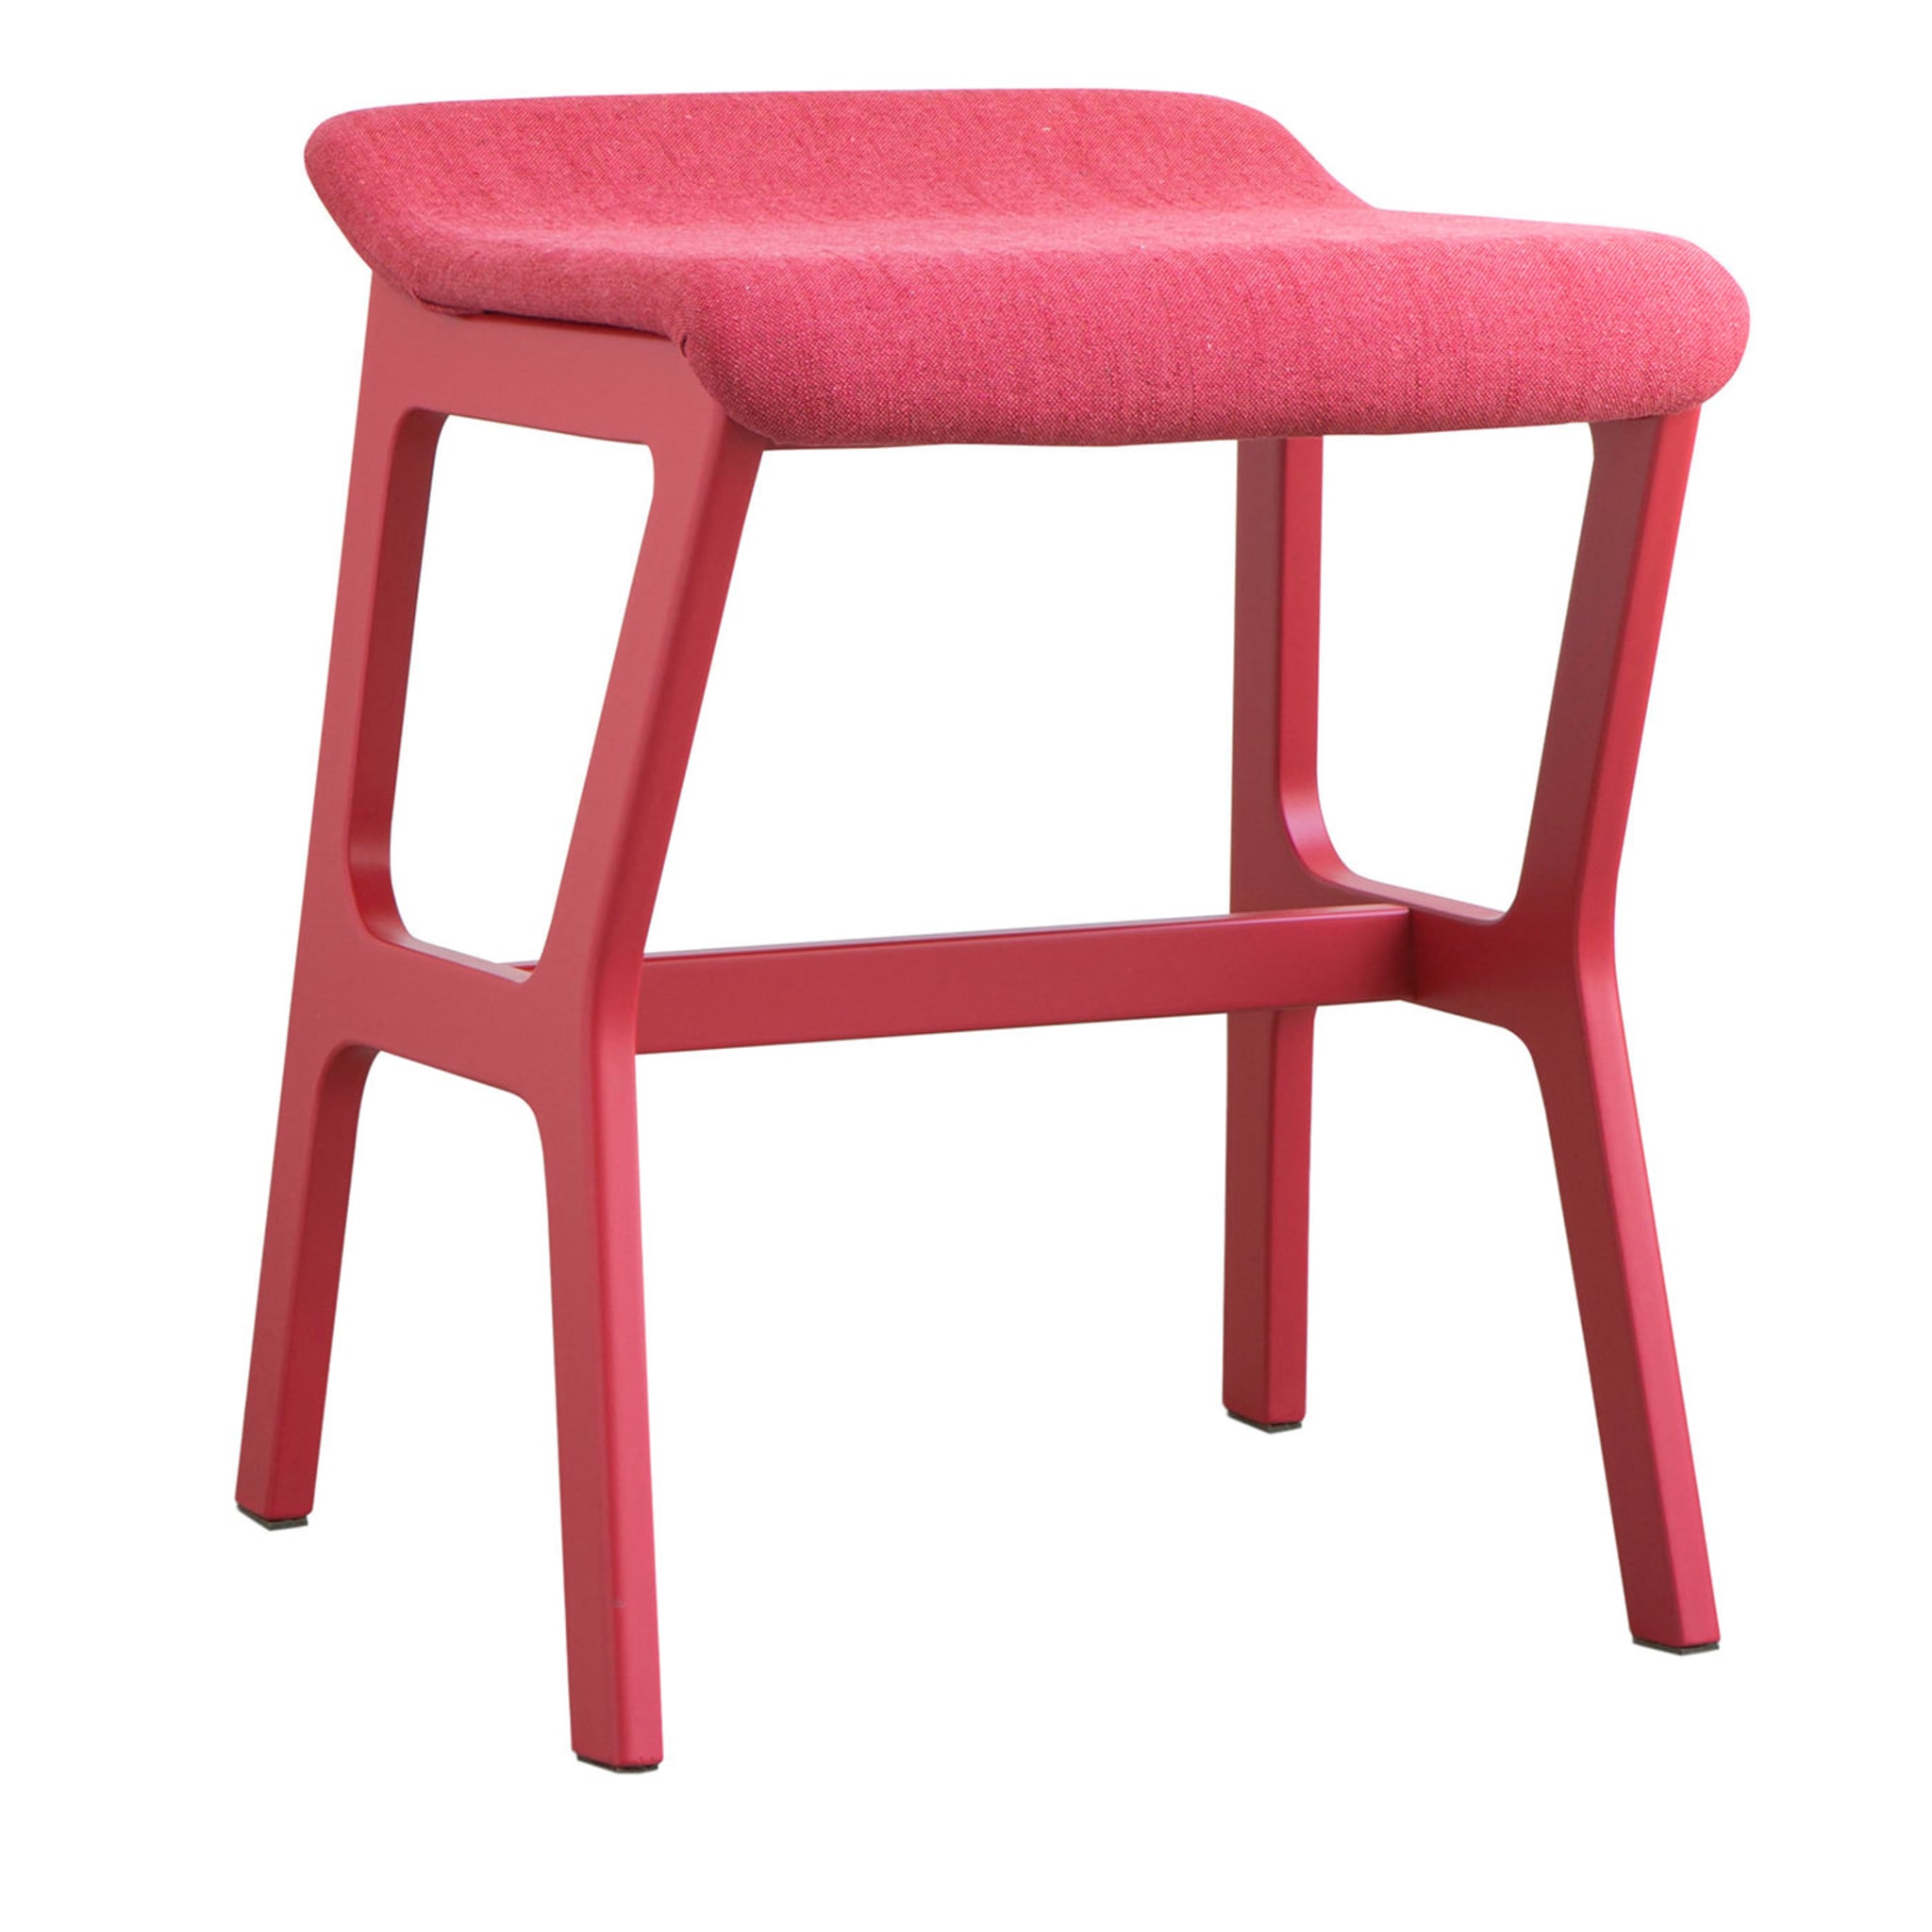 Nhino LE Small Red Stool by Emilio Nanni - Main view